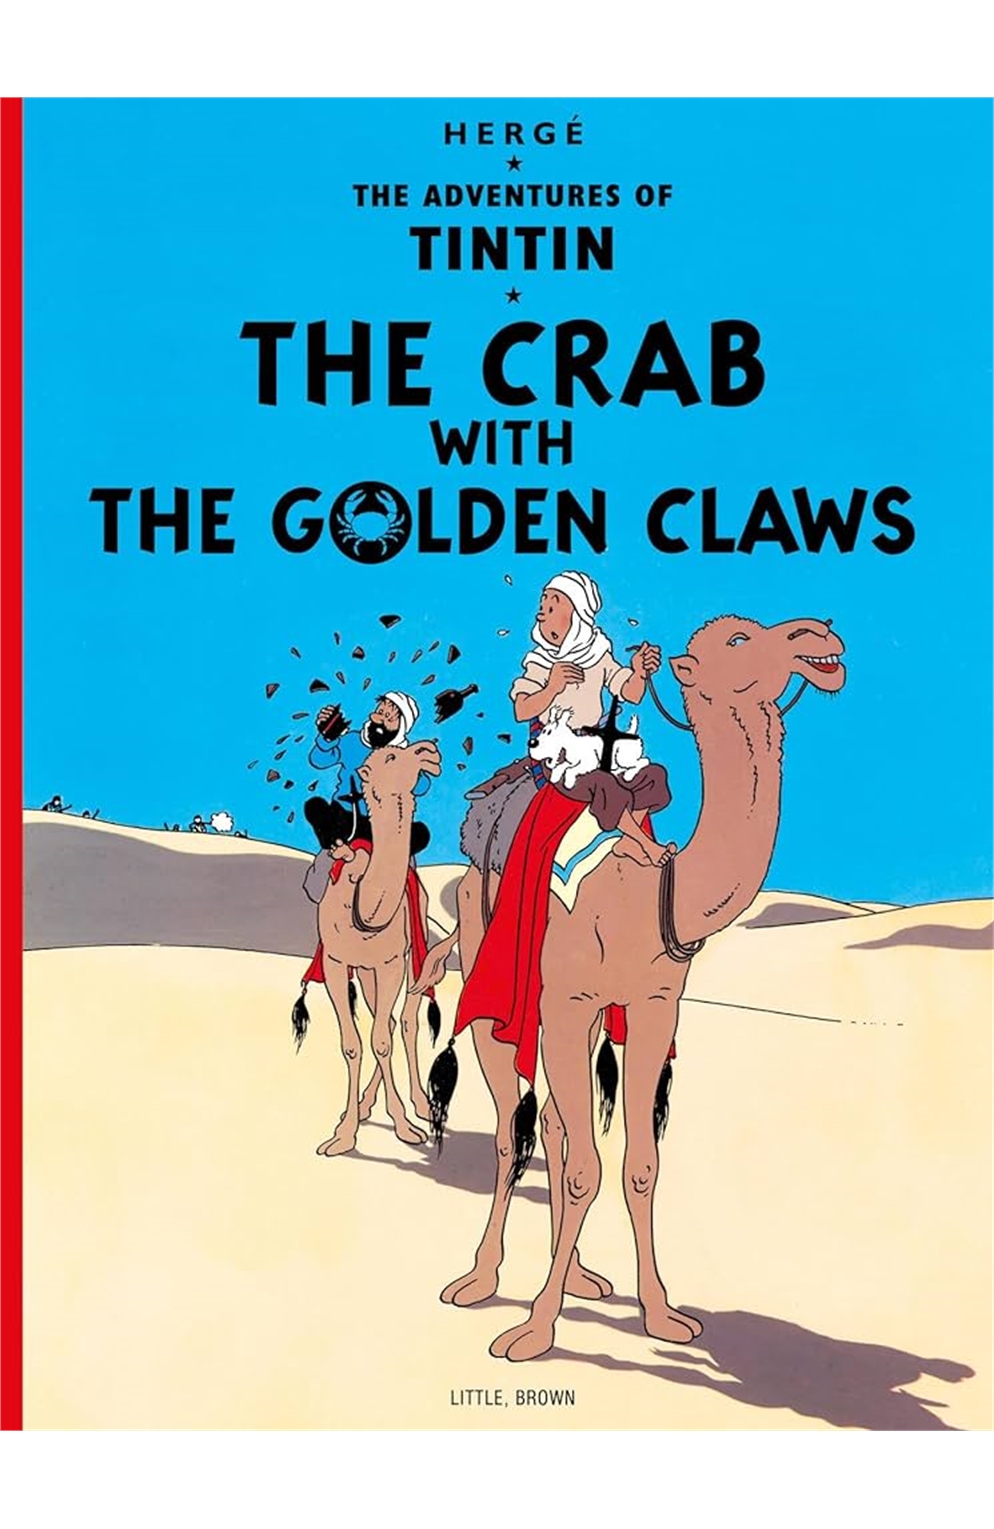 Adventures of Tintin The Crab With Golden Claws